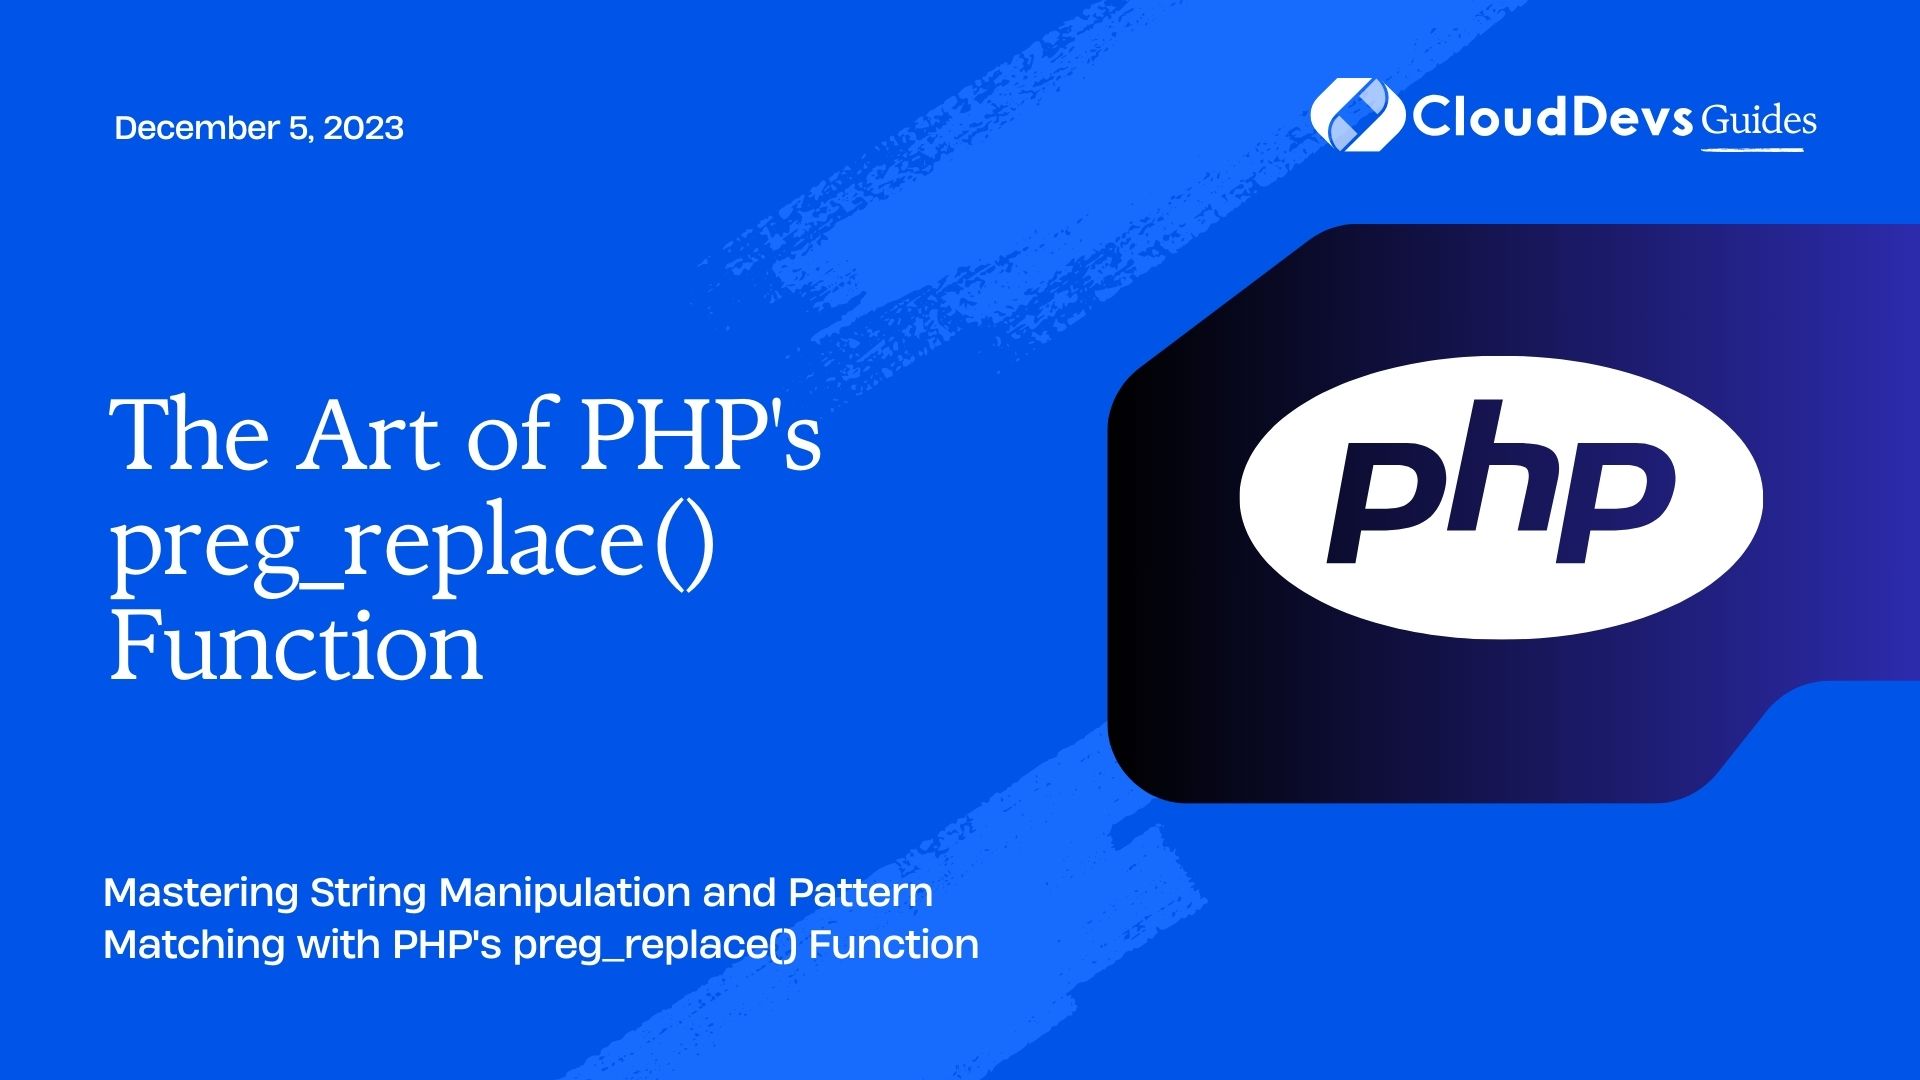 The Art of PHP's preg_replace() Function